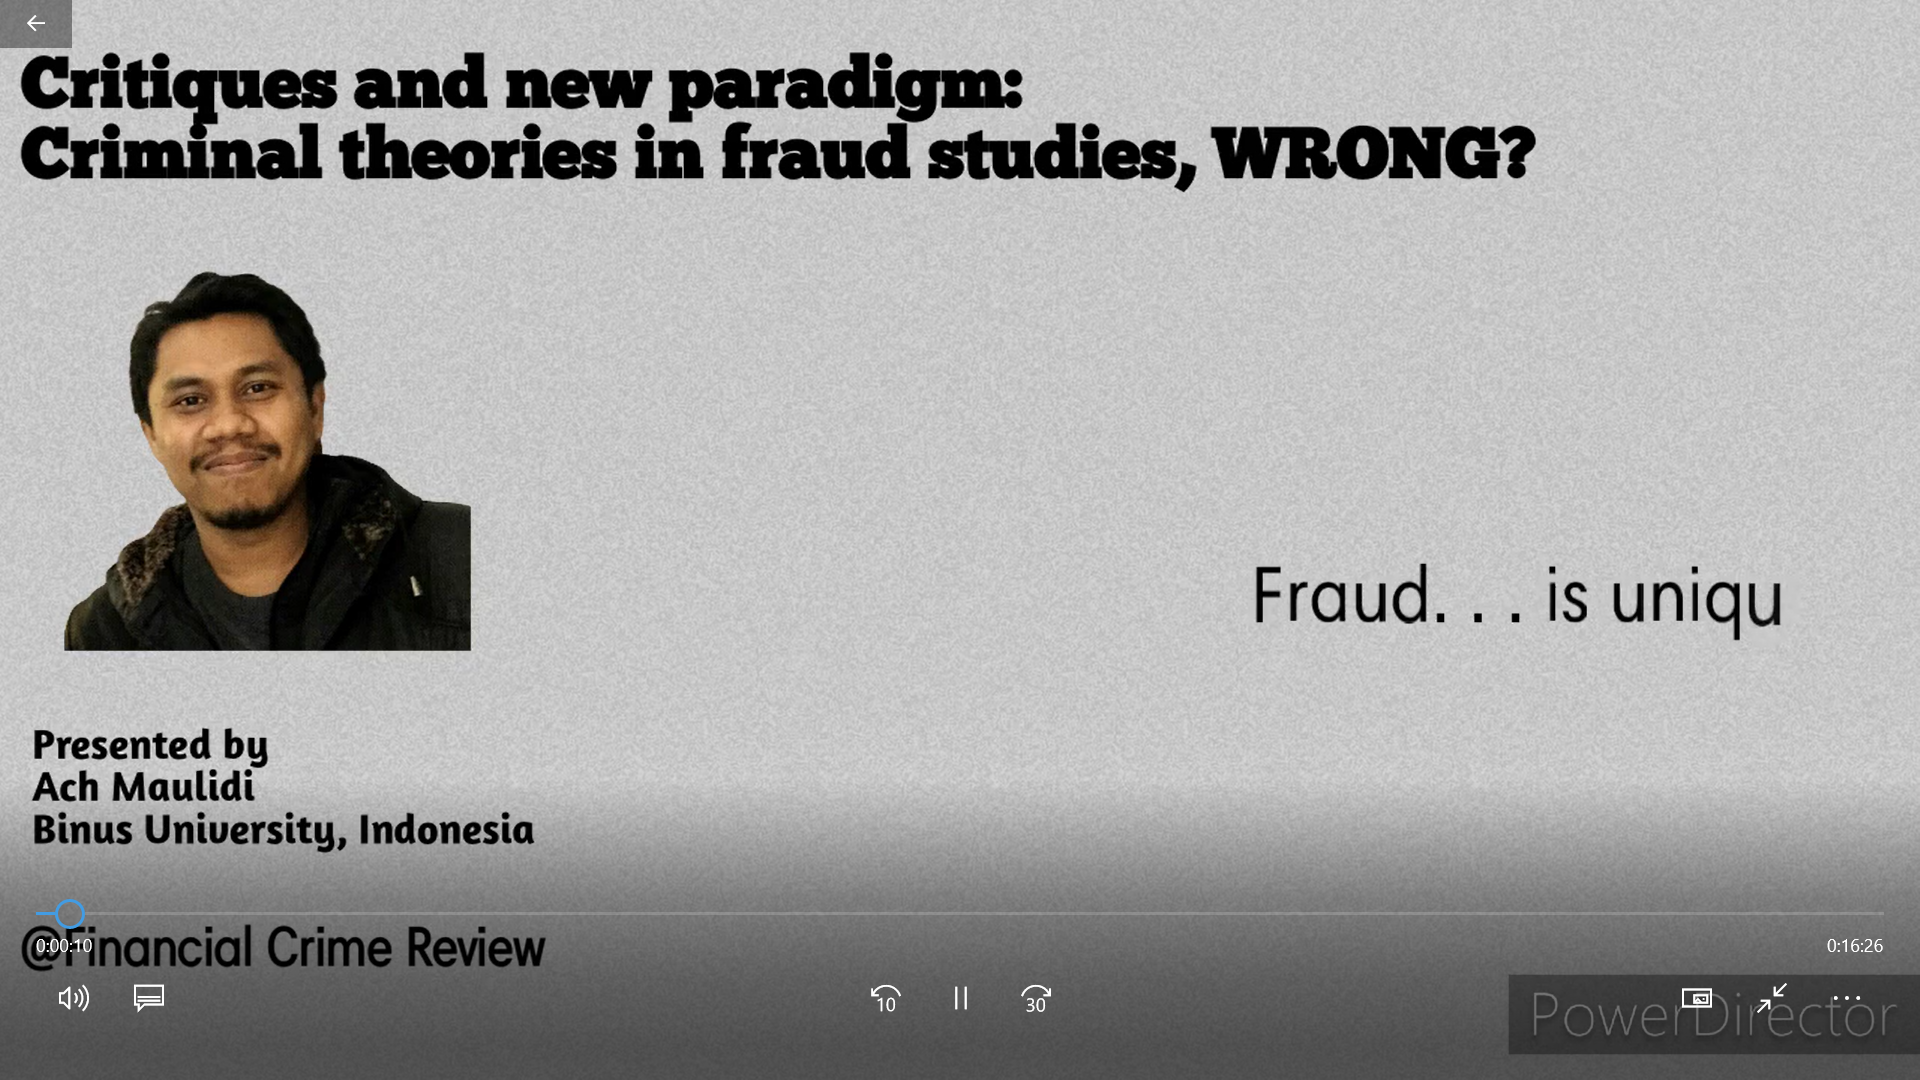 Critiques and new paradigm: Criminal theories in fraud studies, WRONG?